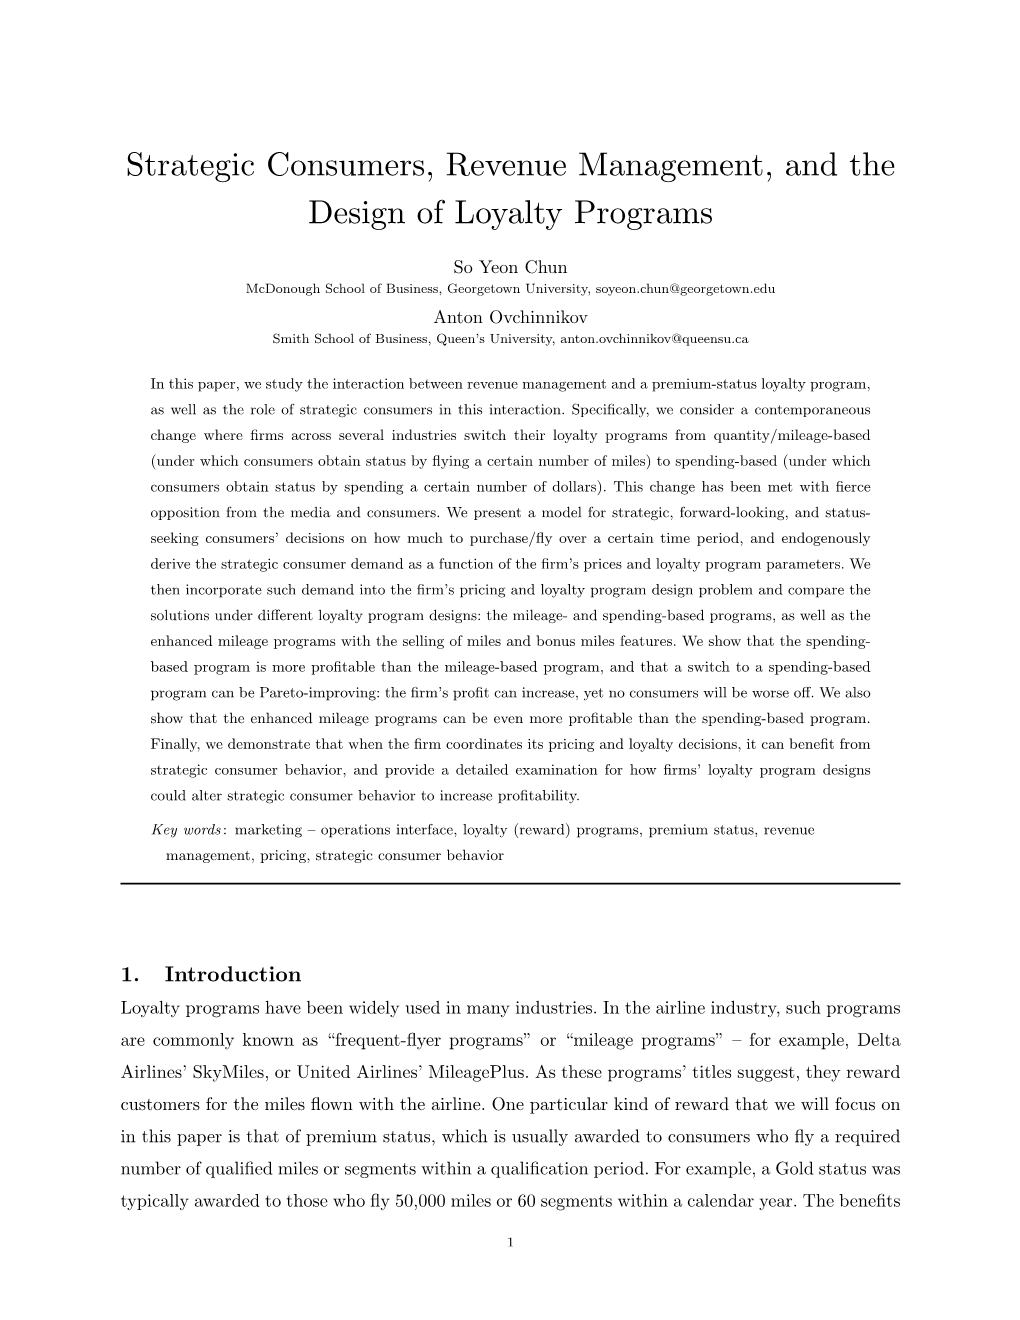 Strategic Consumers, Revenue Management, and the Design of Loyalty Programs